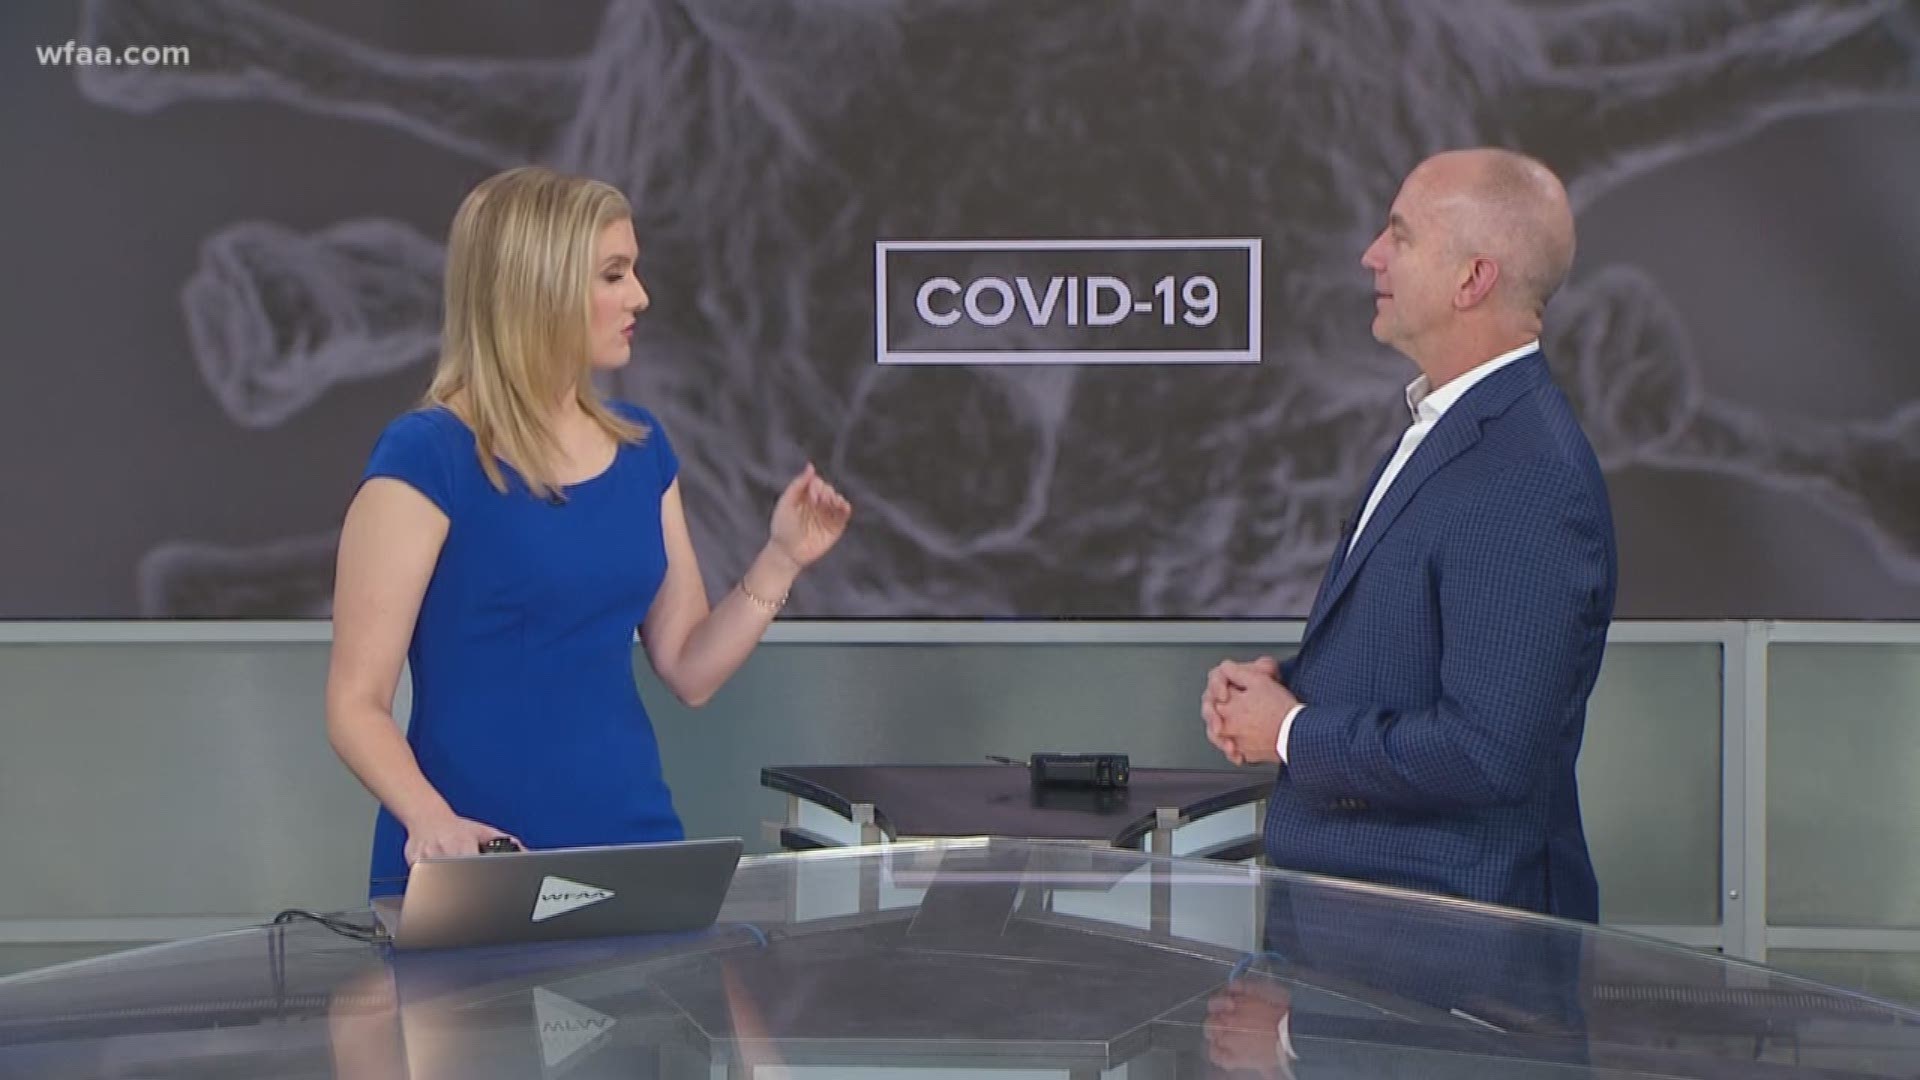 How are you coping with COVID-19? Dr. Kevin Gilliland a licensed clinical psychologist and the Executive Director of Innovation360 is here with some tips.